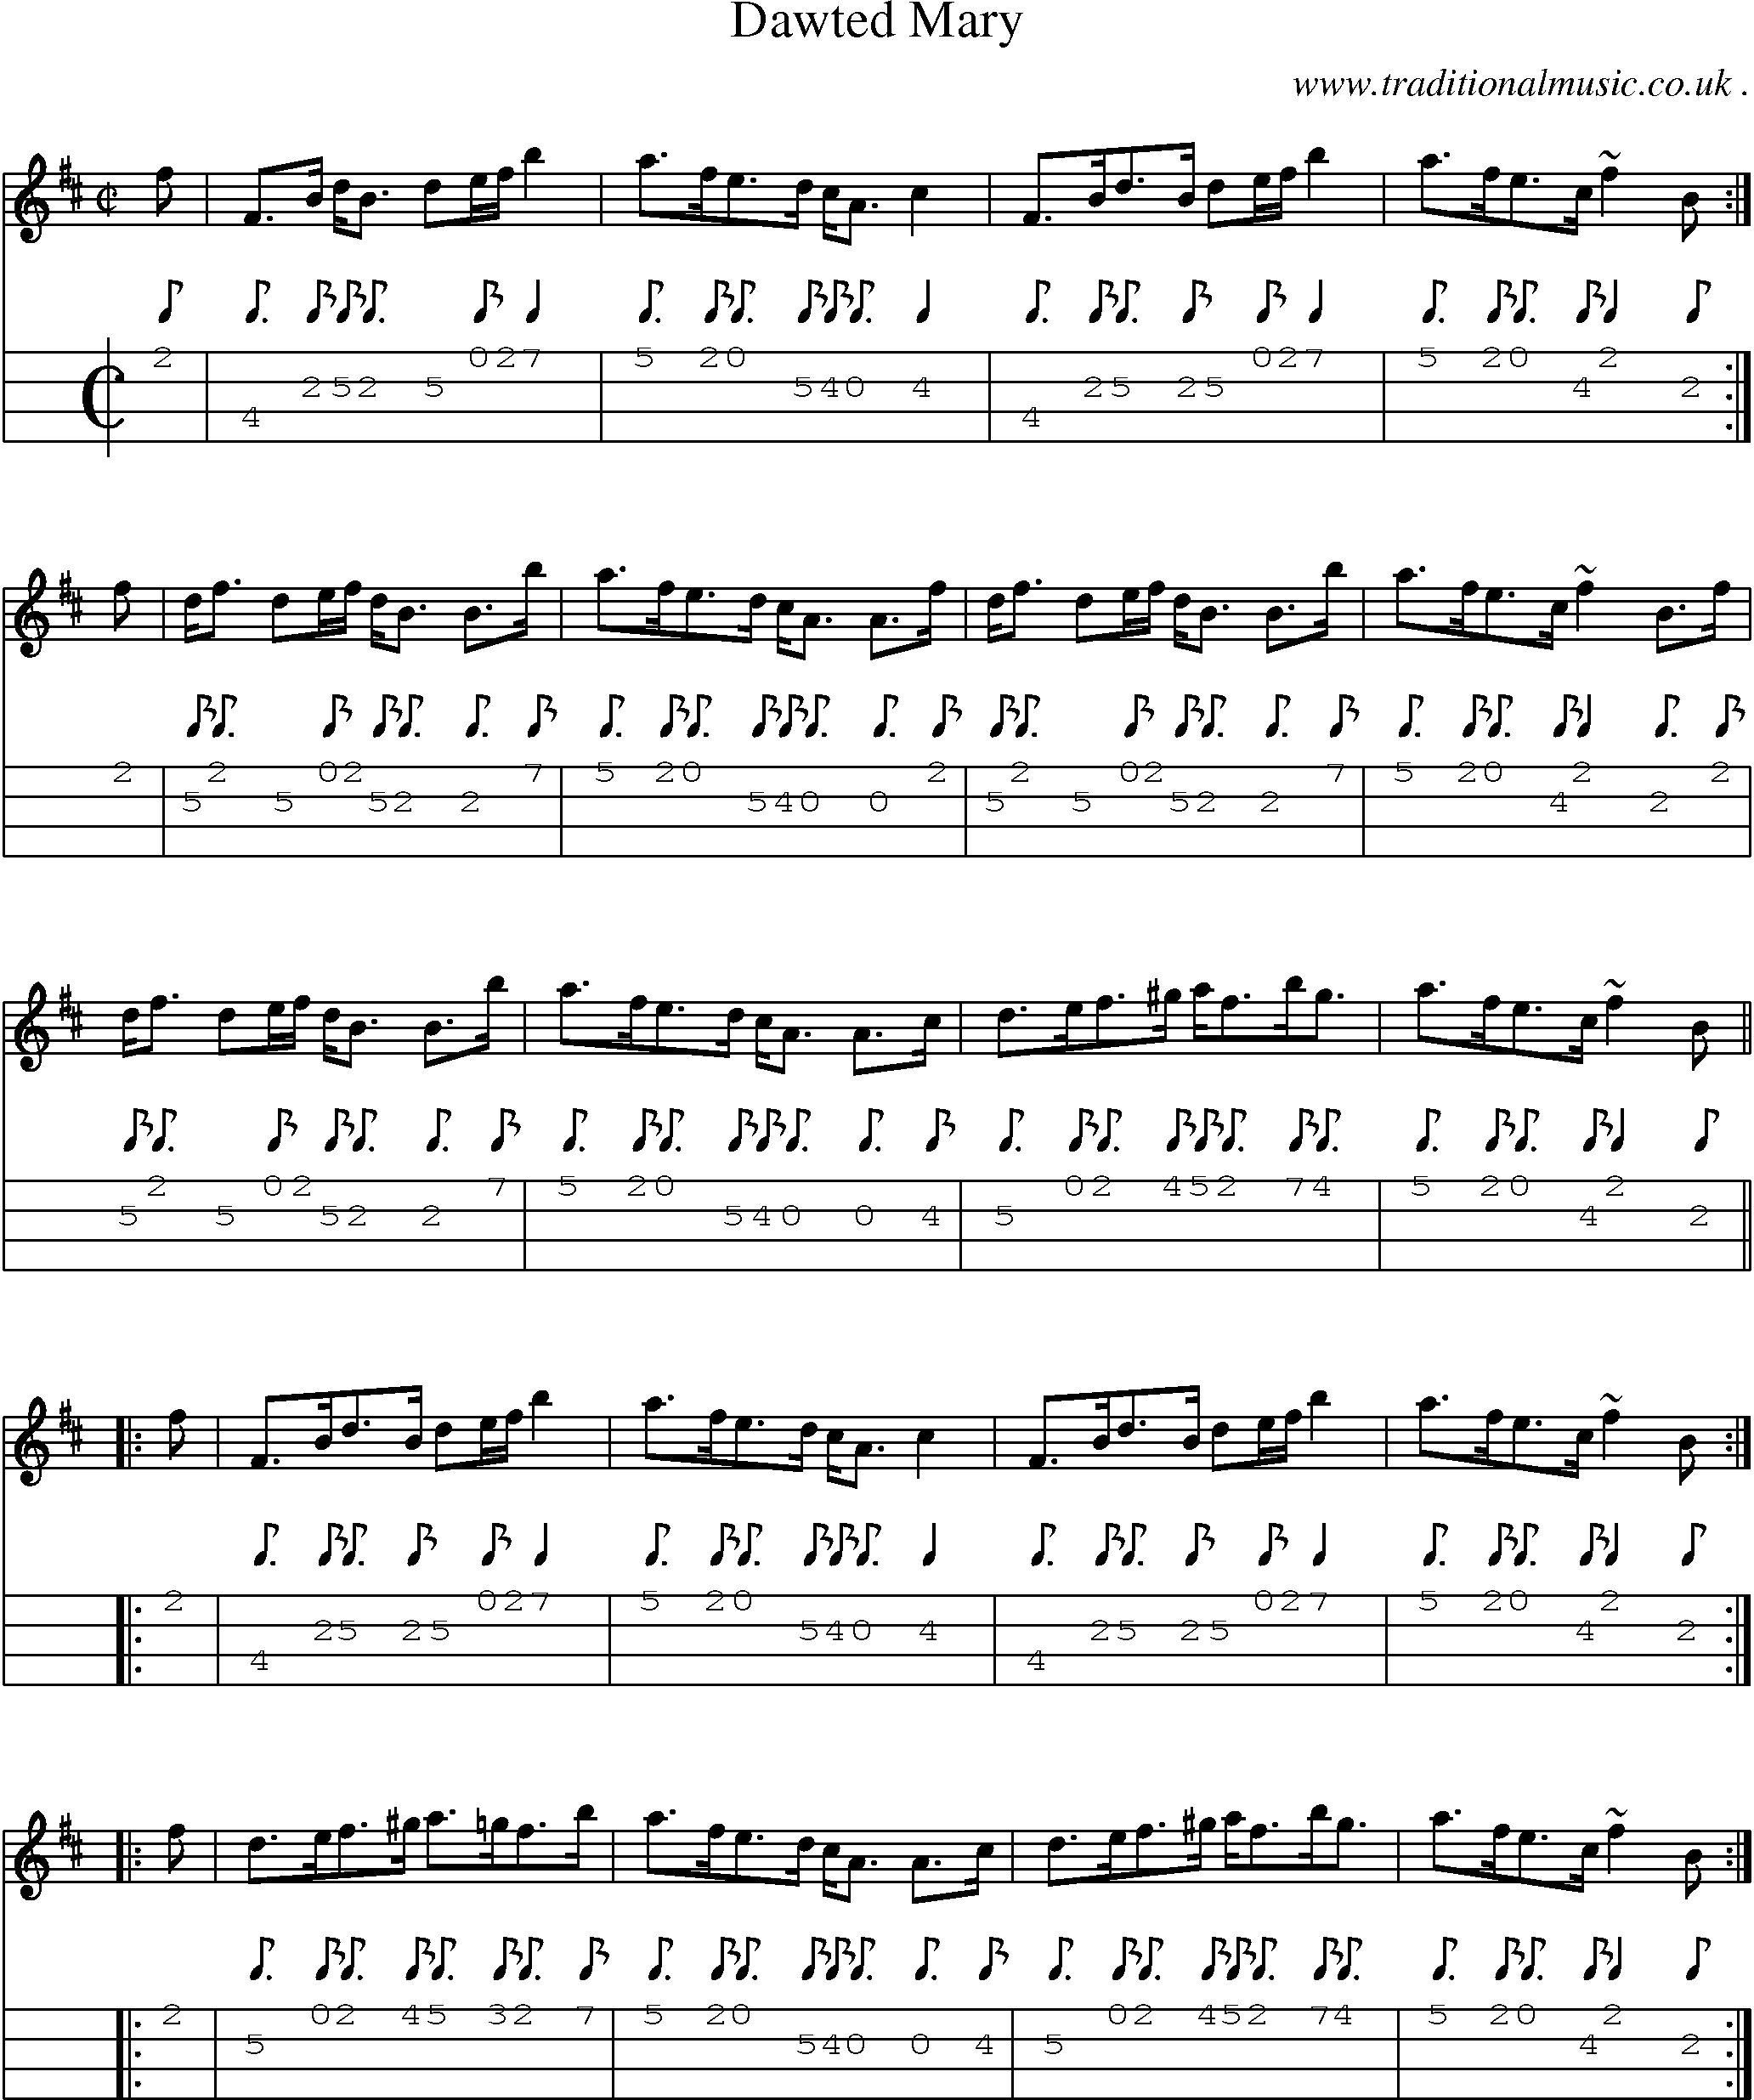 Sheet-music  score, Chords and Mandolin Tabs for Dawted Mary